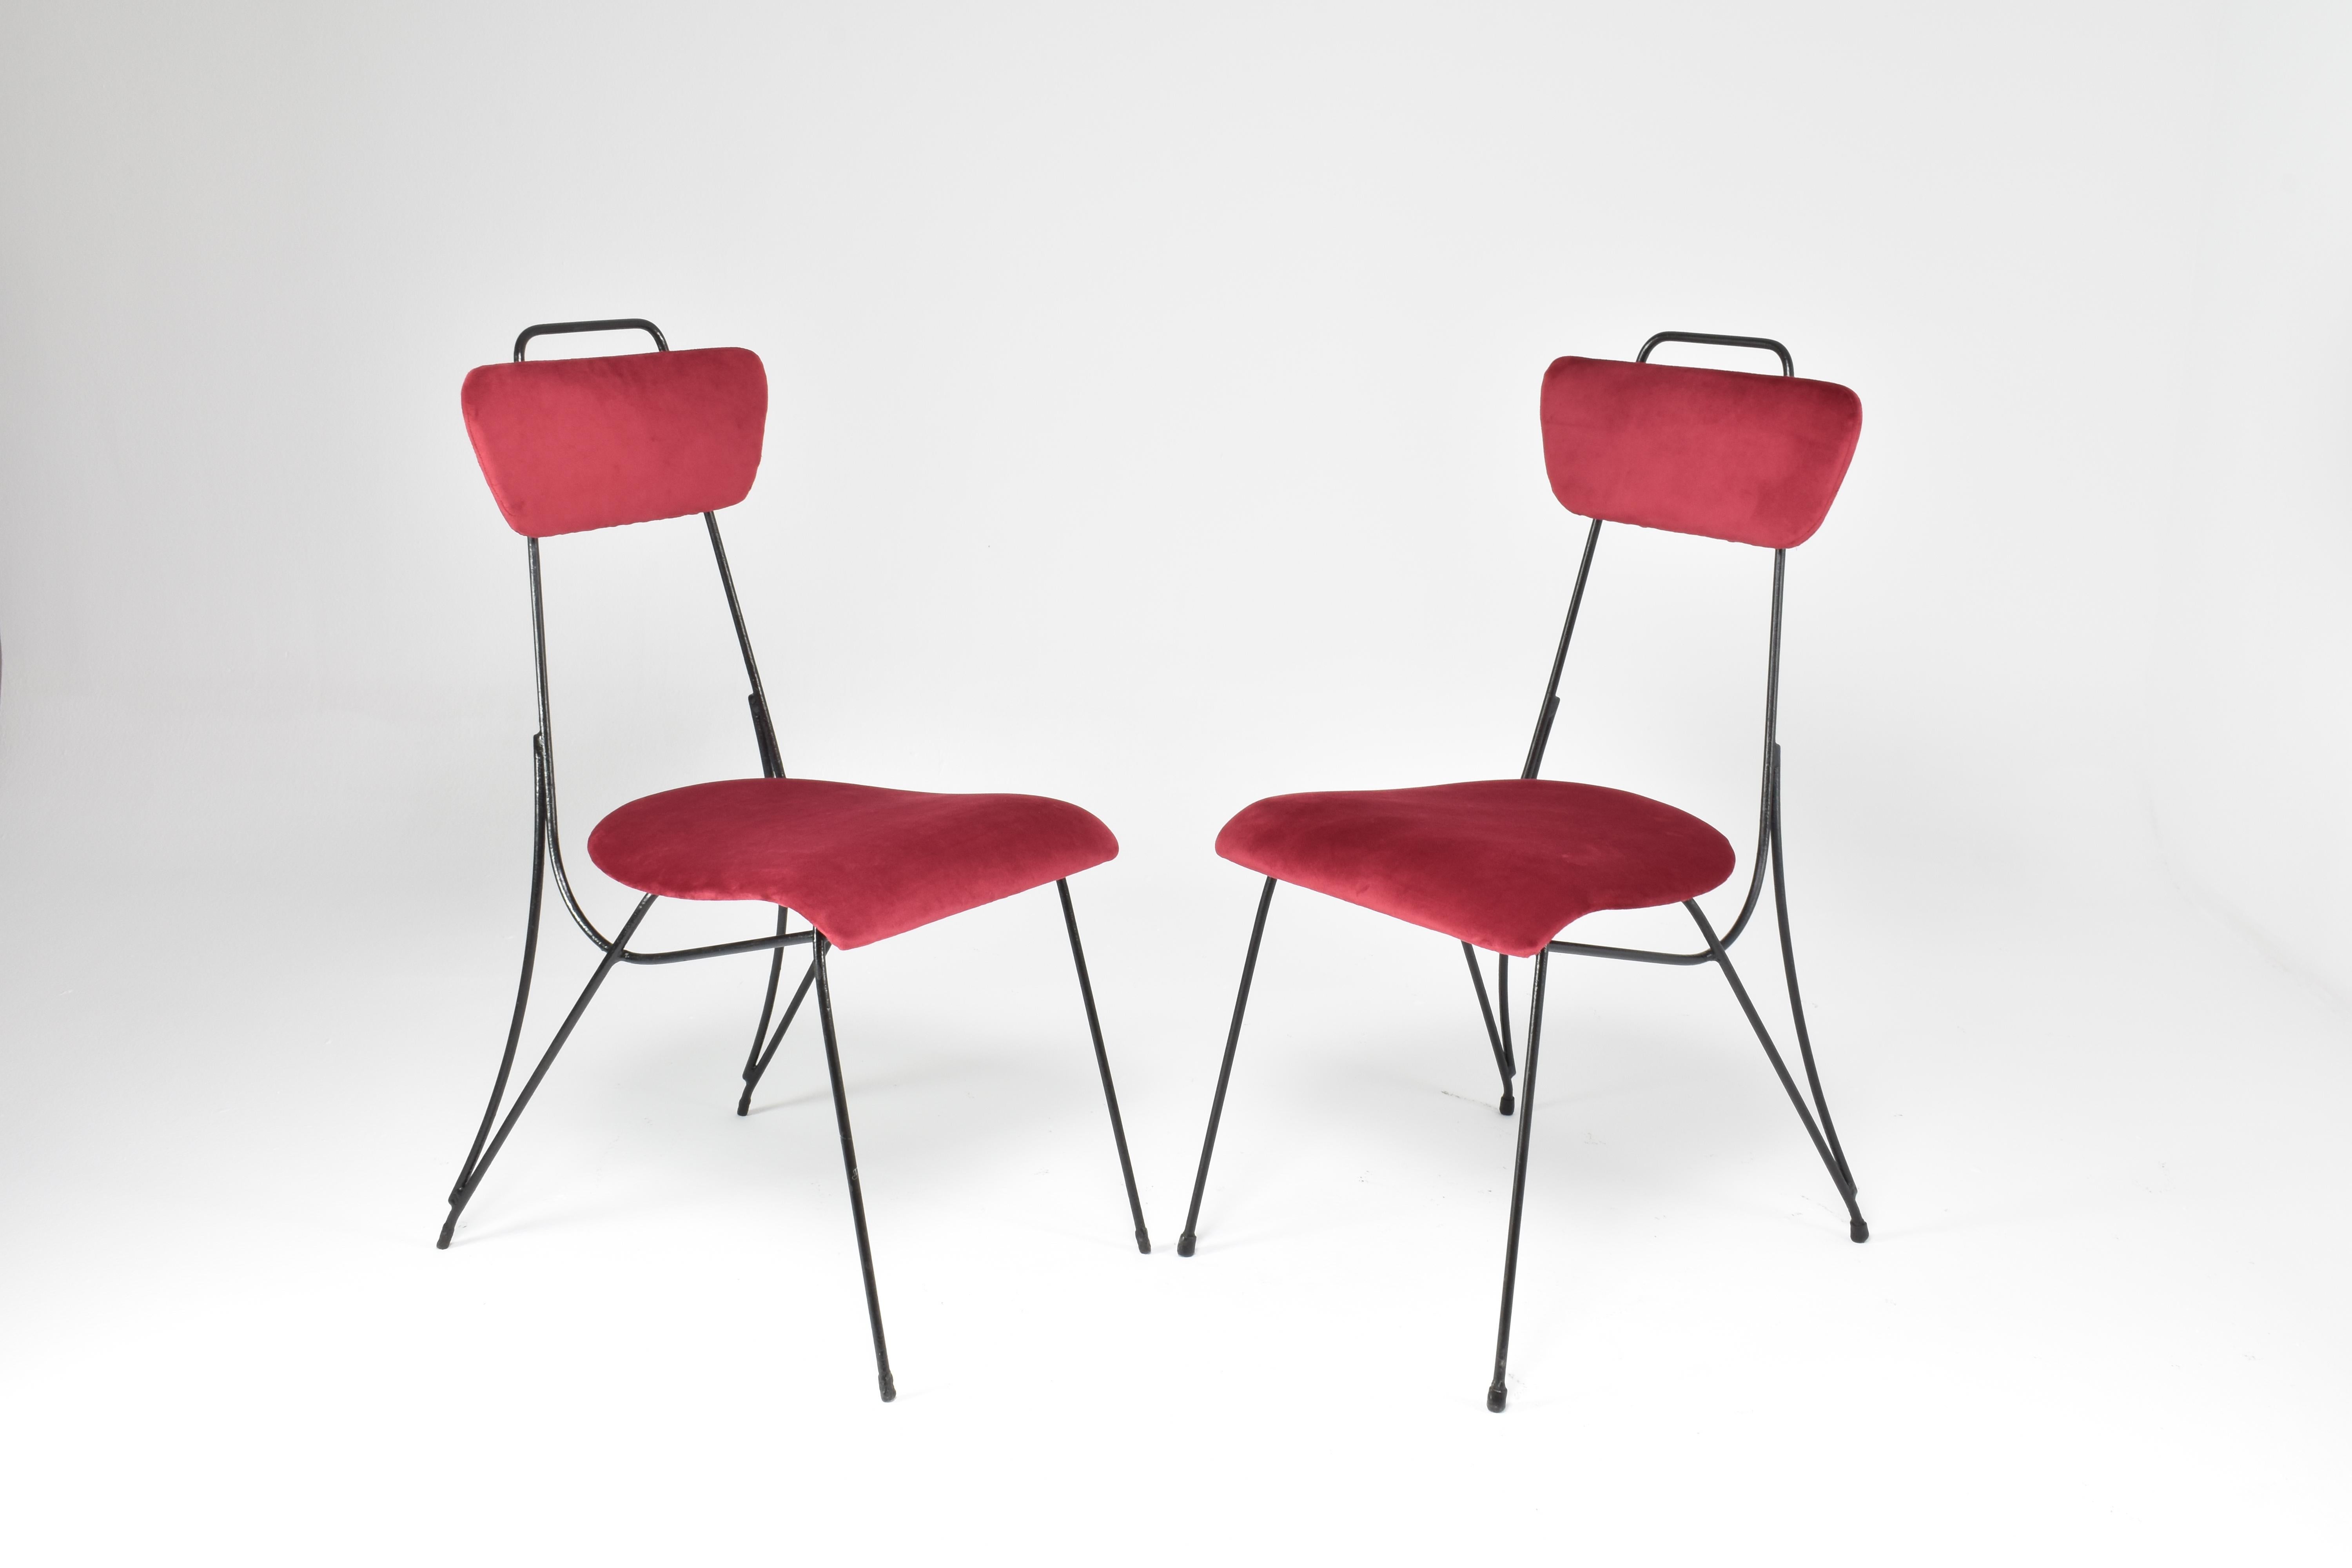 A very cool pair of chairs made in France in the 1950s designed with black tubular steel frame in its original vintage condition, highlighted by meticulously restored red velvet upholstery seat and backrest. 
France. 1950's
Price is per piece /